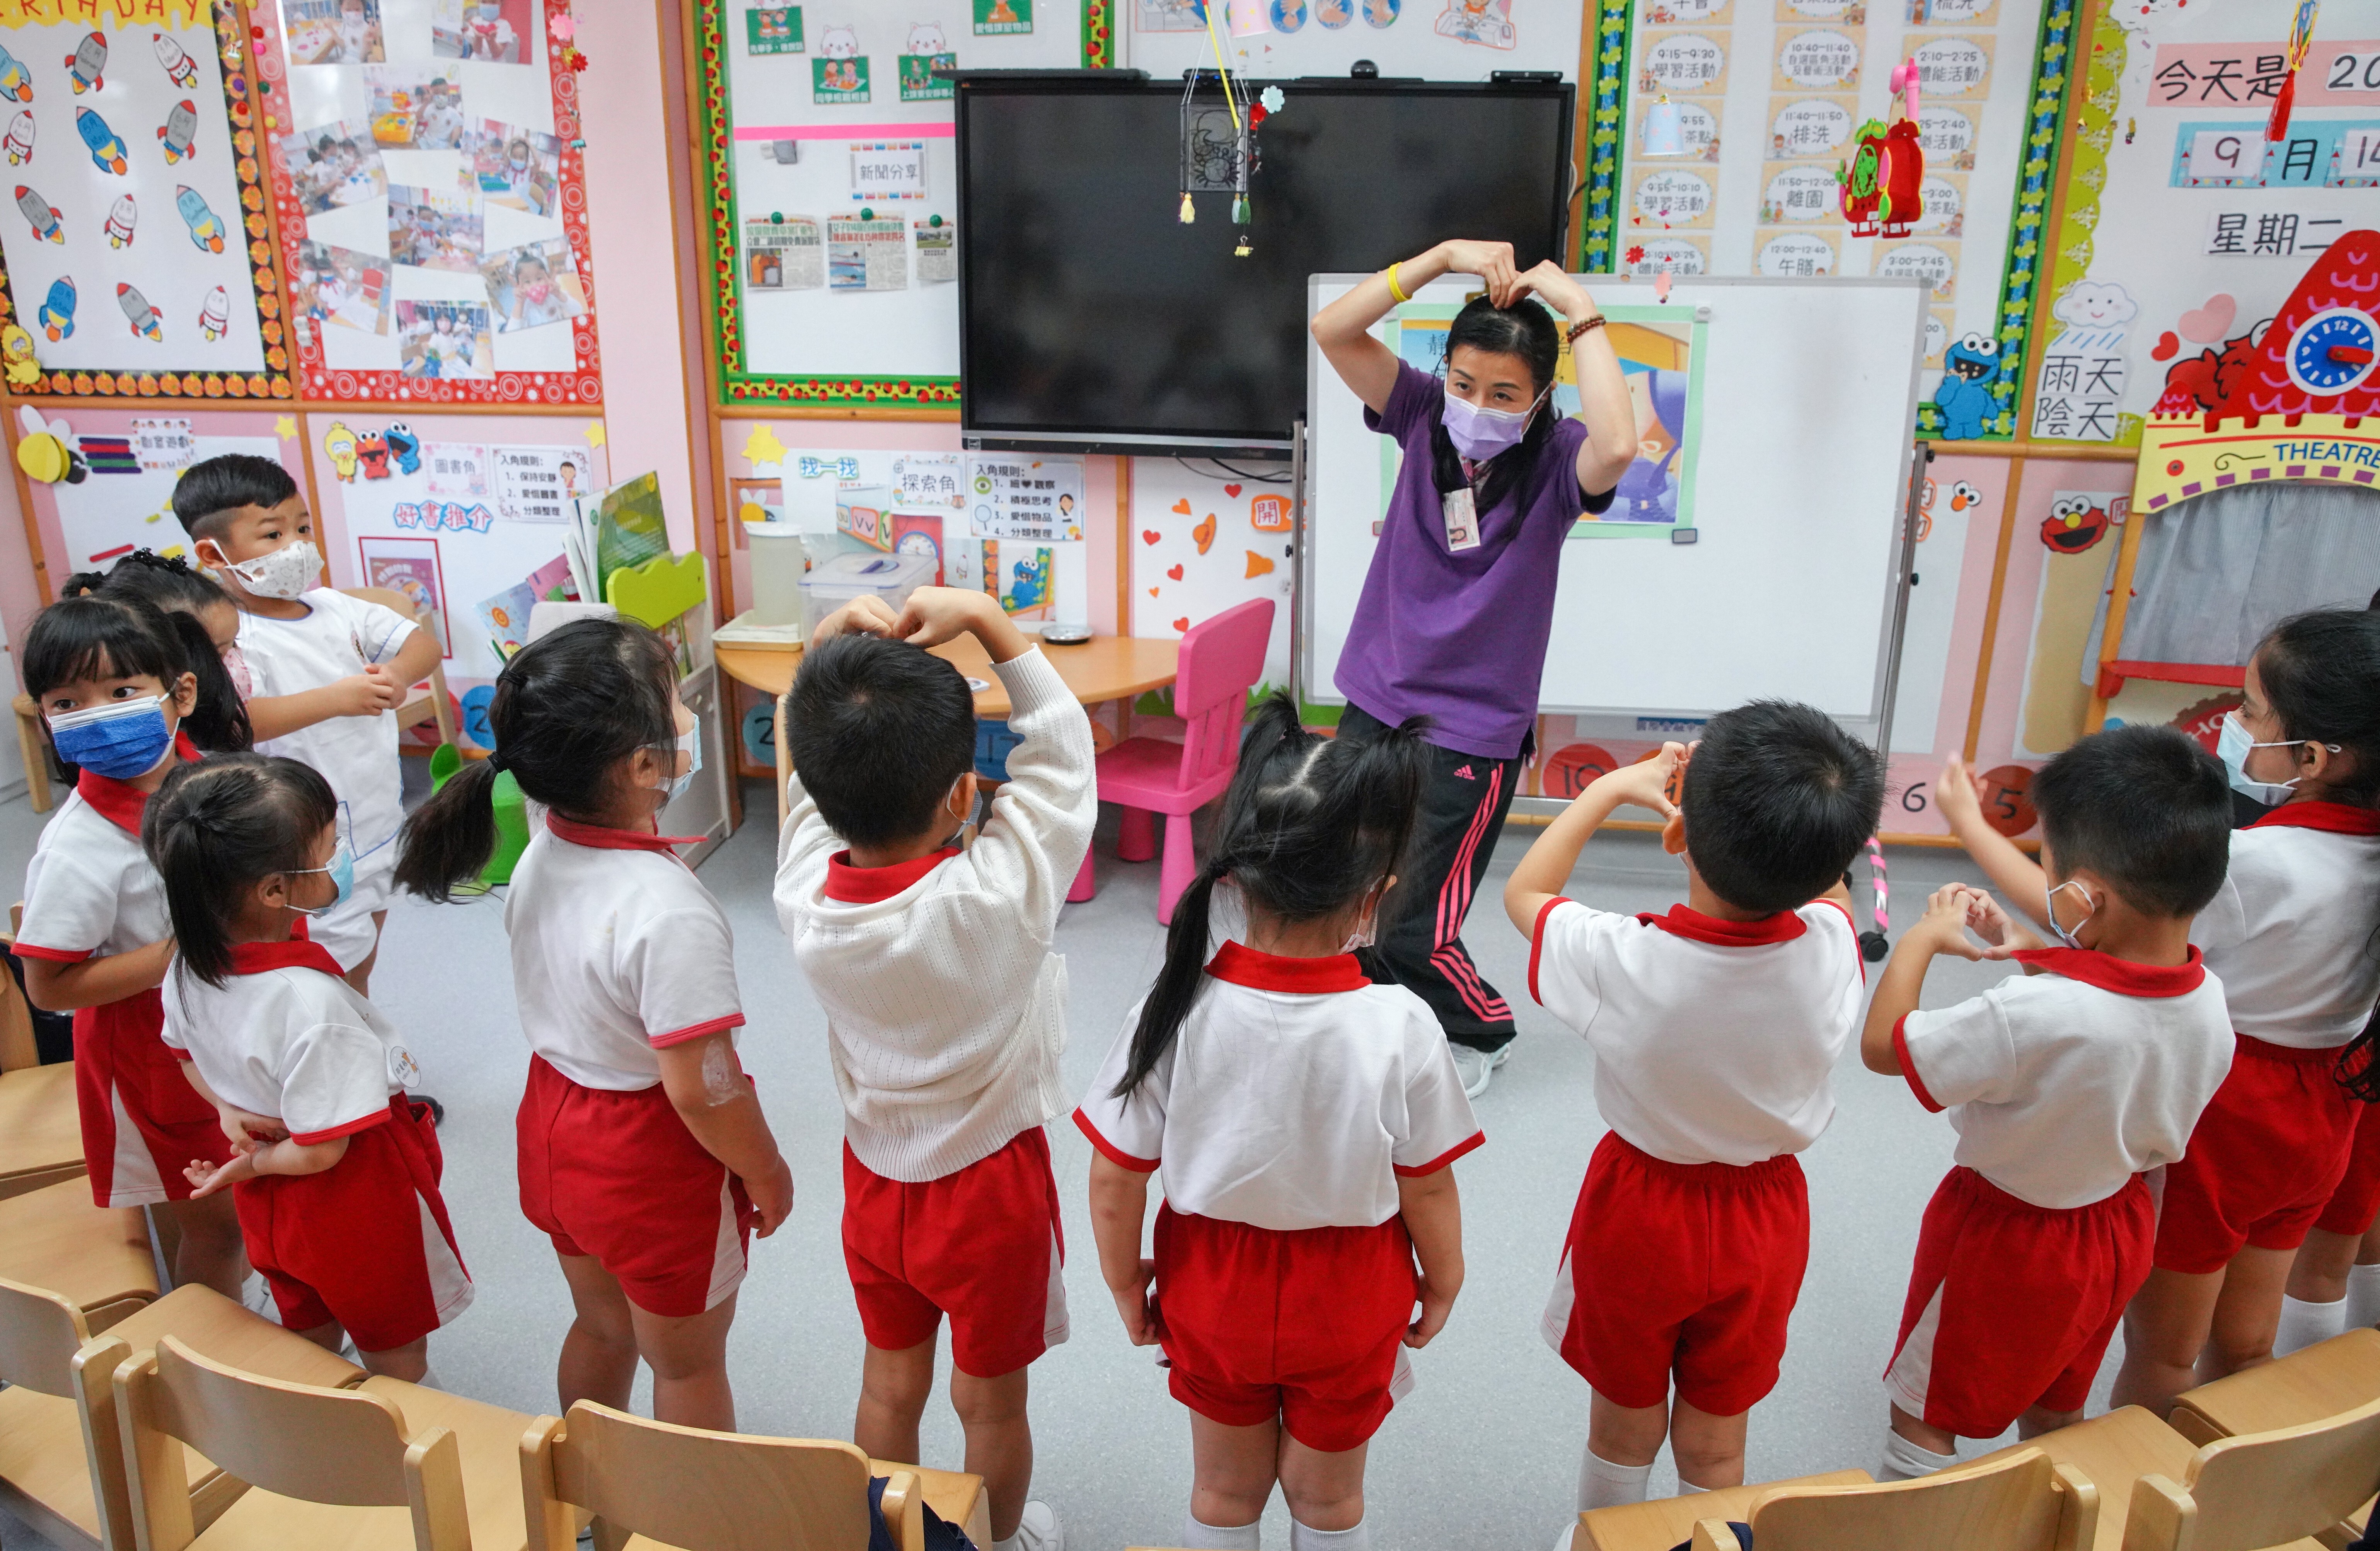 Some 88 kindergartens across the city are among the institutions that have successfully applied to increase their tuition fees. Photo: Winson Wong